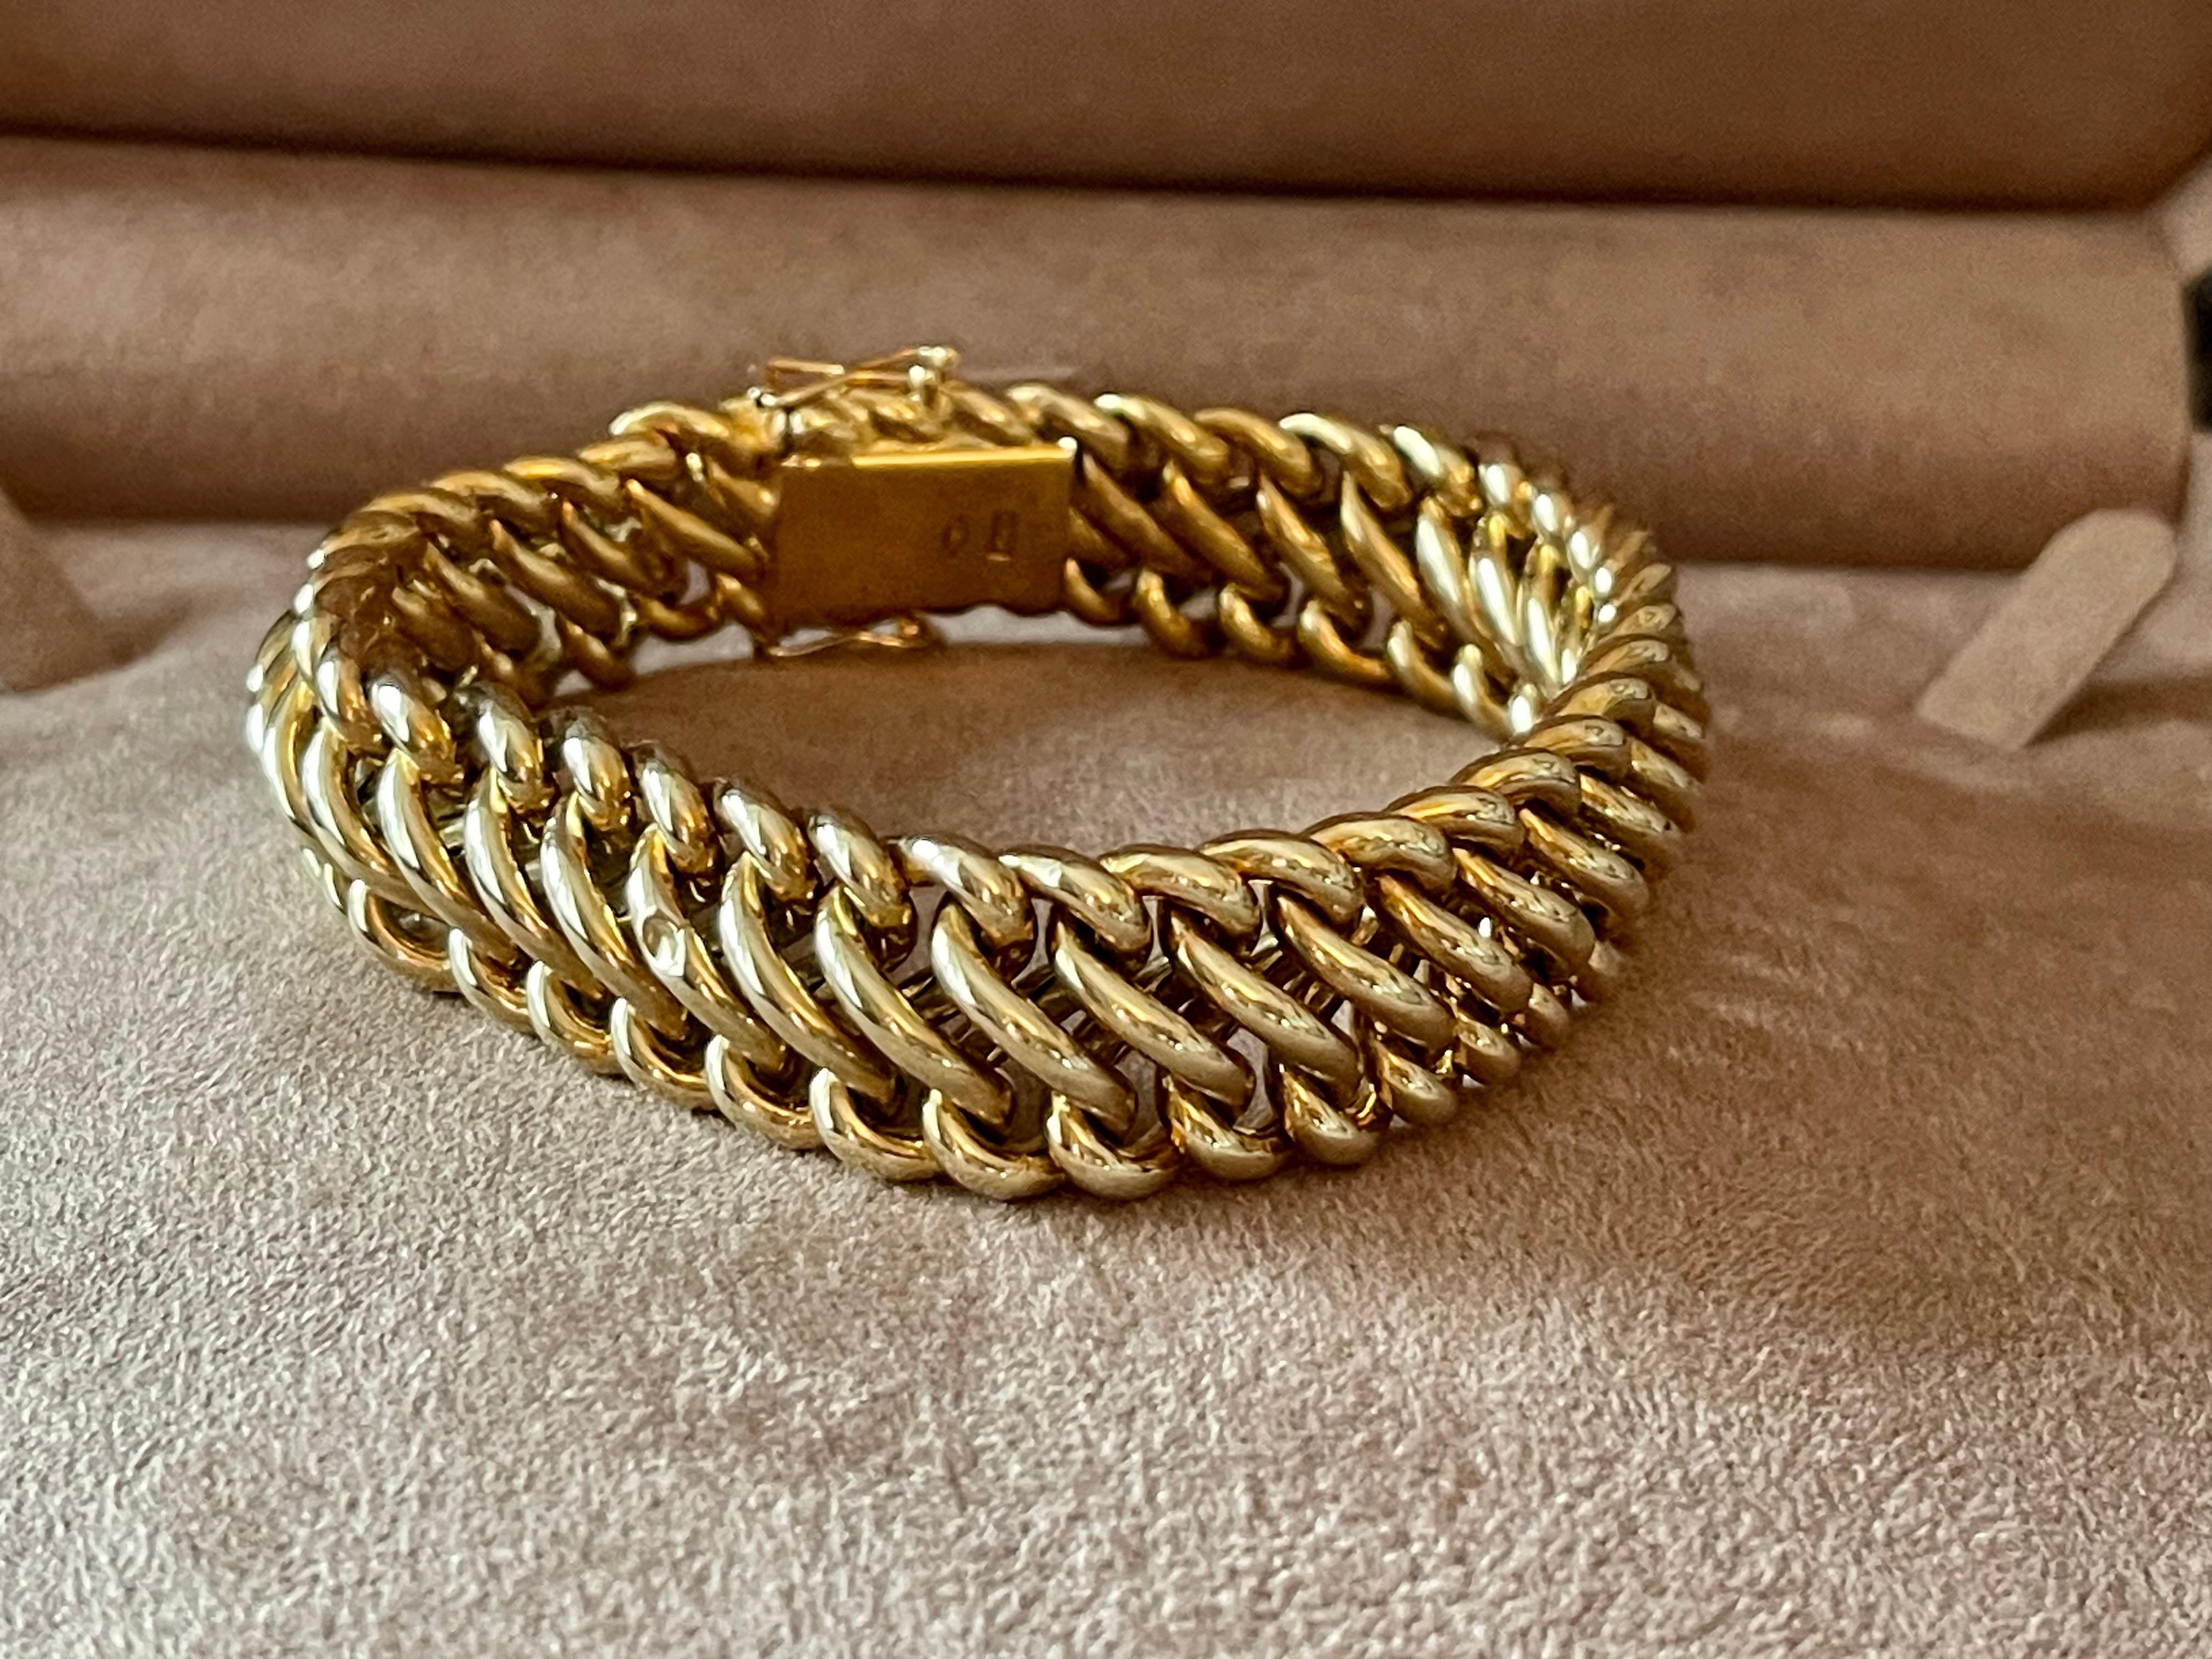 A timeless 18 K Vintage Bracelet. This circa 1950's chain bracelet gives an upgrade to the normal gold chain bracelet in your drawer. 
Length: 20 cm. Width: 1.70 cm  Weight: 35.89 grams. 
QUESTIONS?  Contact us right away if you have additional